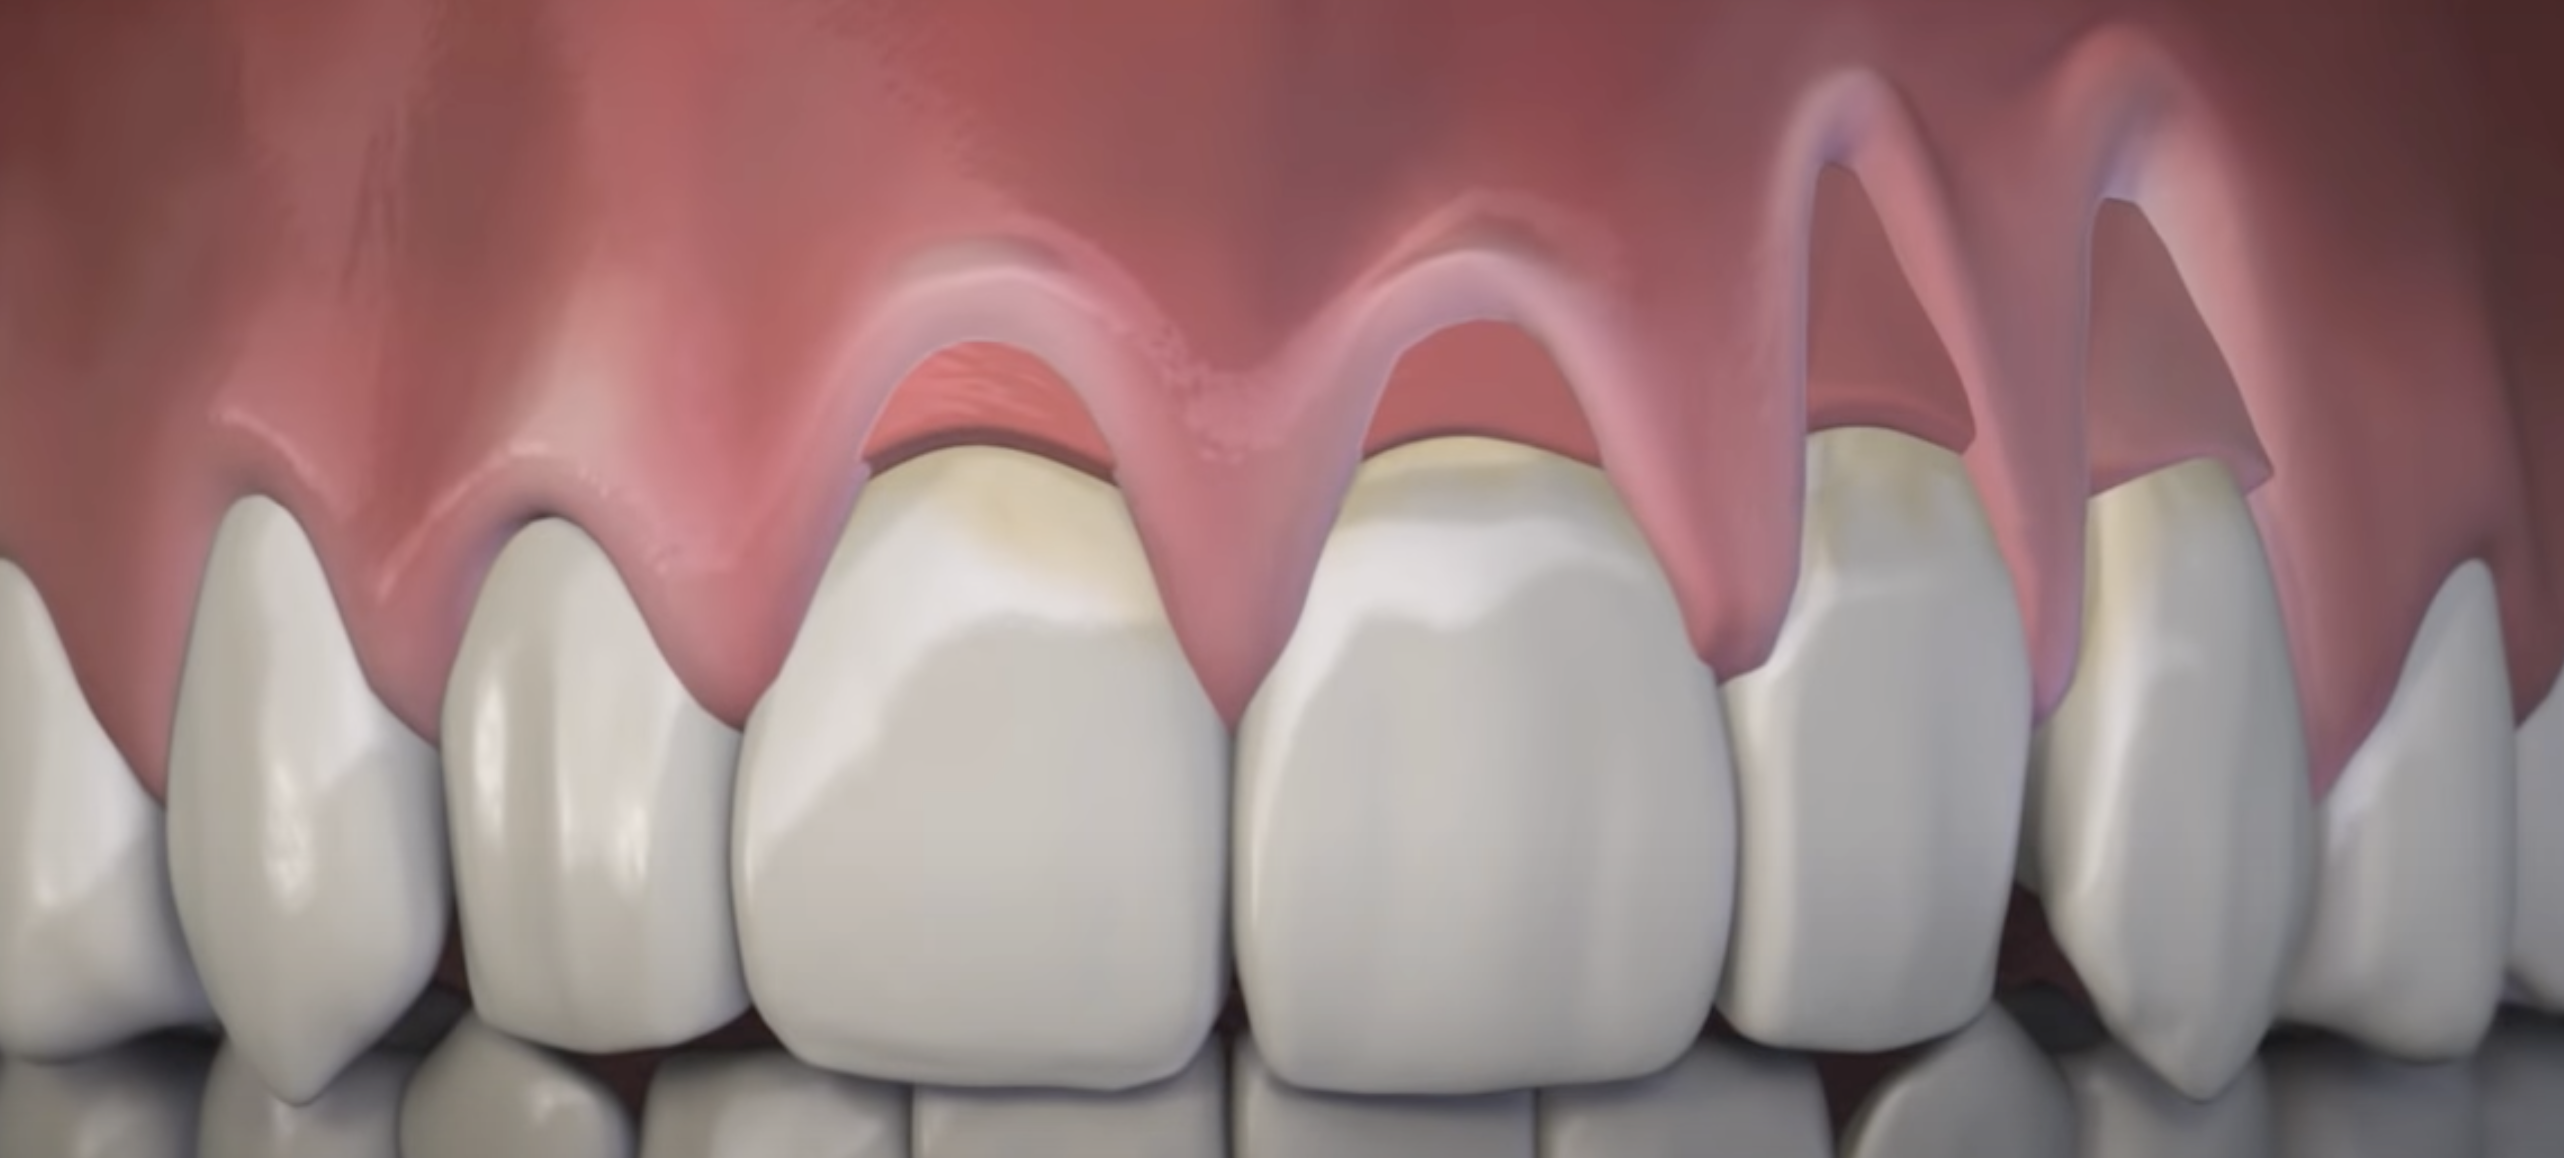 close up Illustration of upper front showing end teeth showing result of pinhole surgery